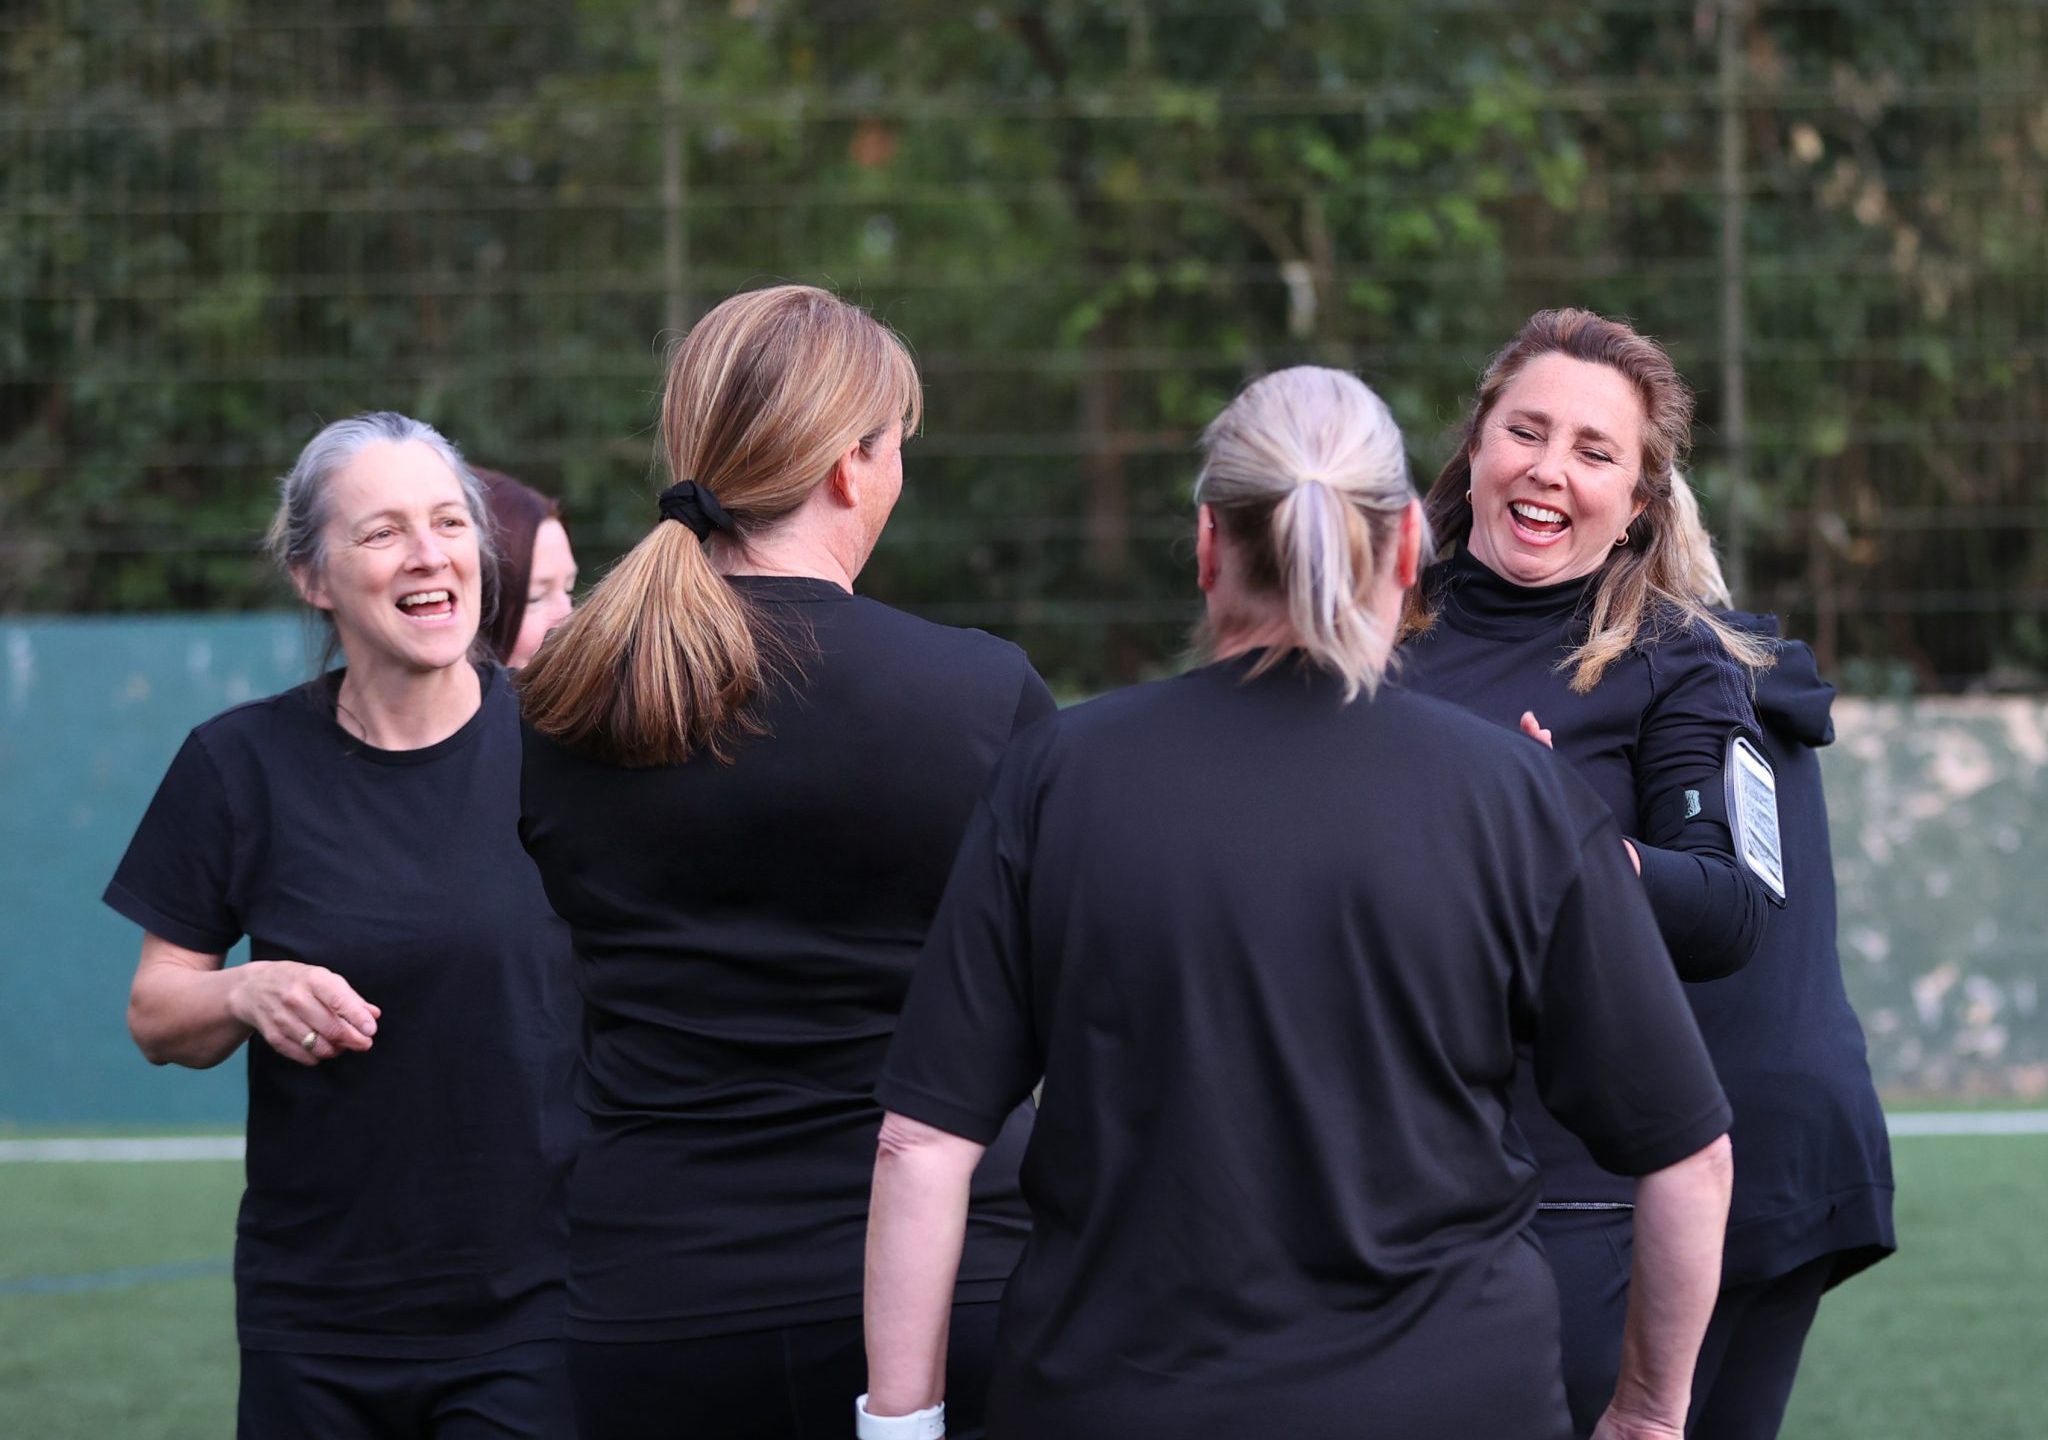 A group of white women aged 40-60 chatting during their football session